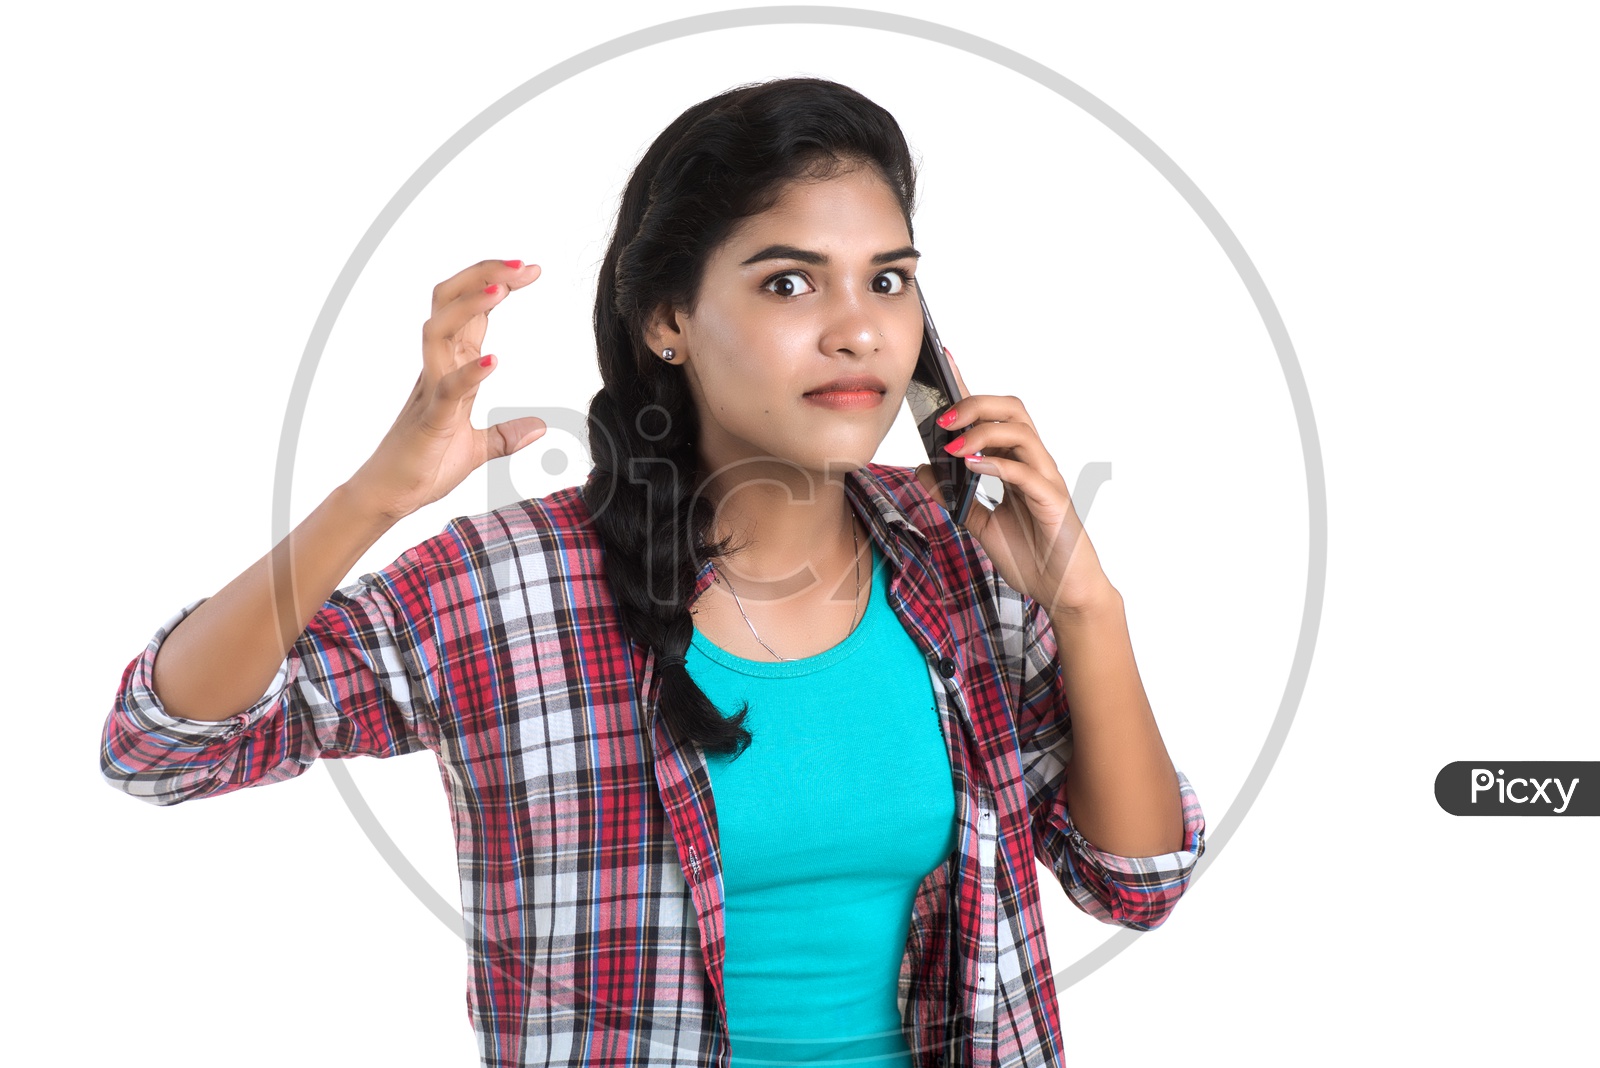 A Happy Young Indian Girl Talking In Smart Phone with a Expression on her  Face on an Isolated White Background